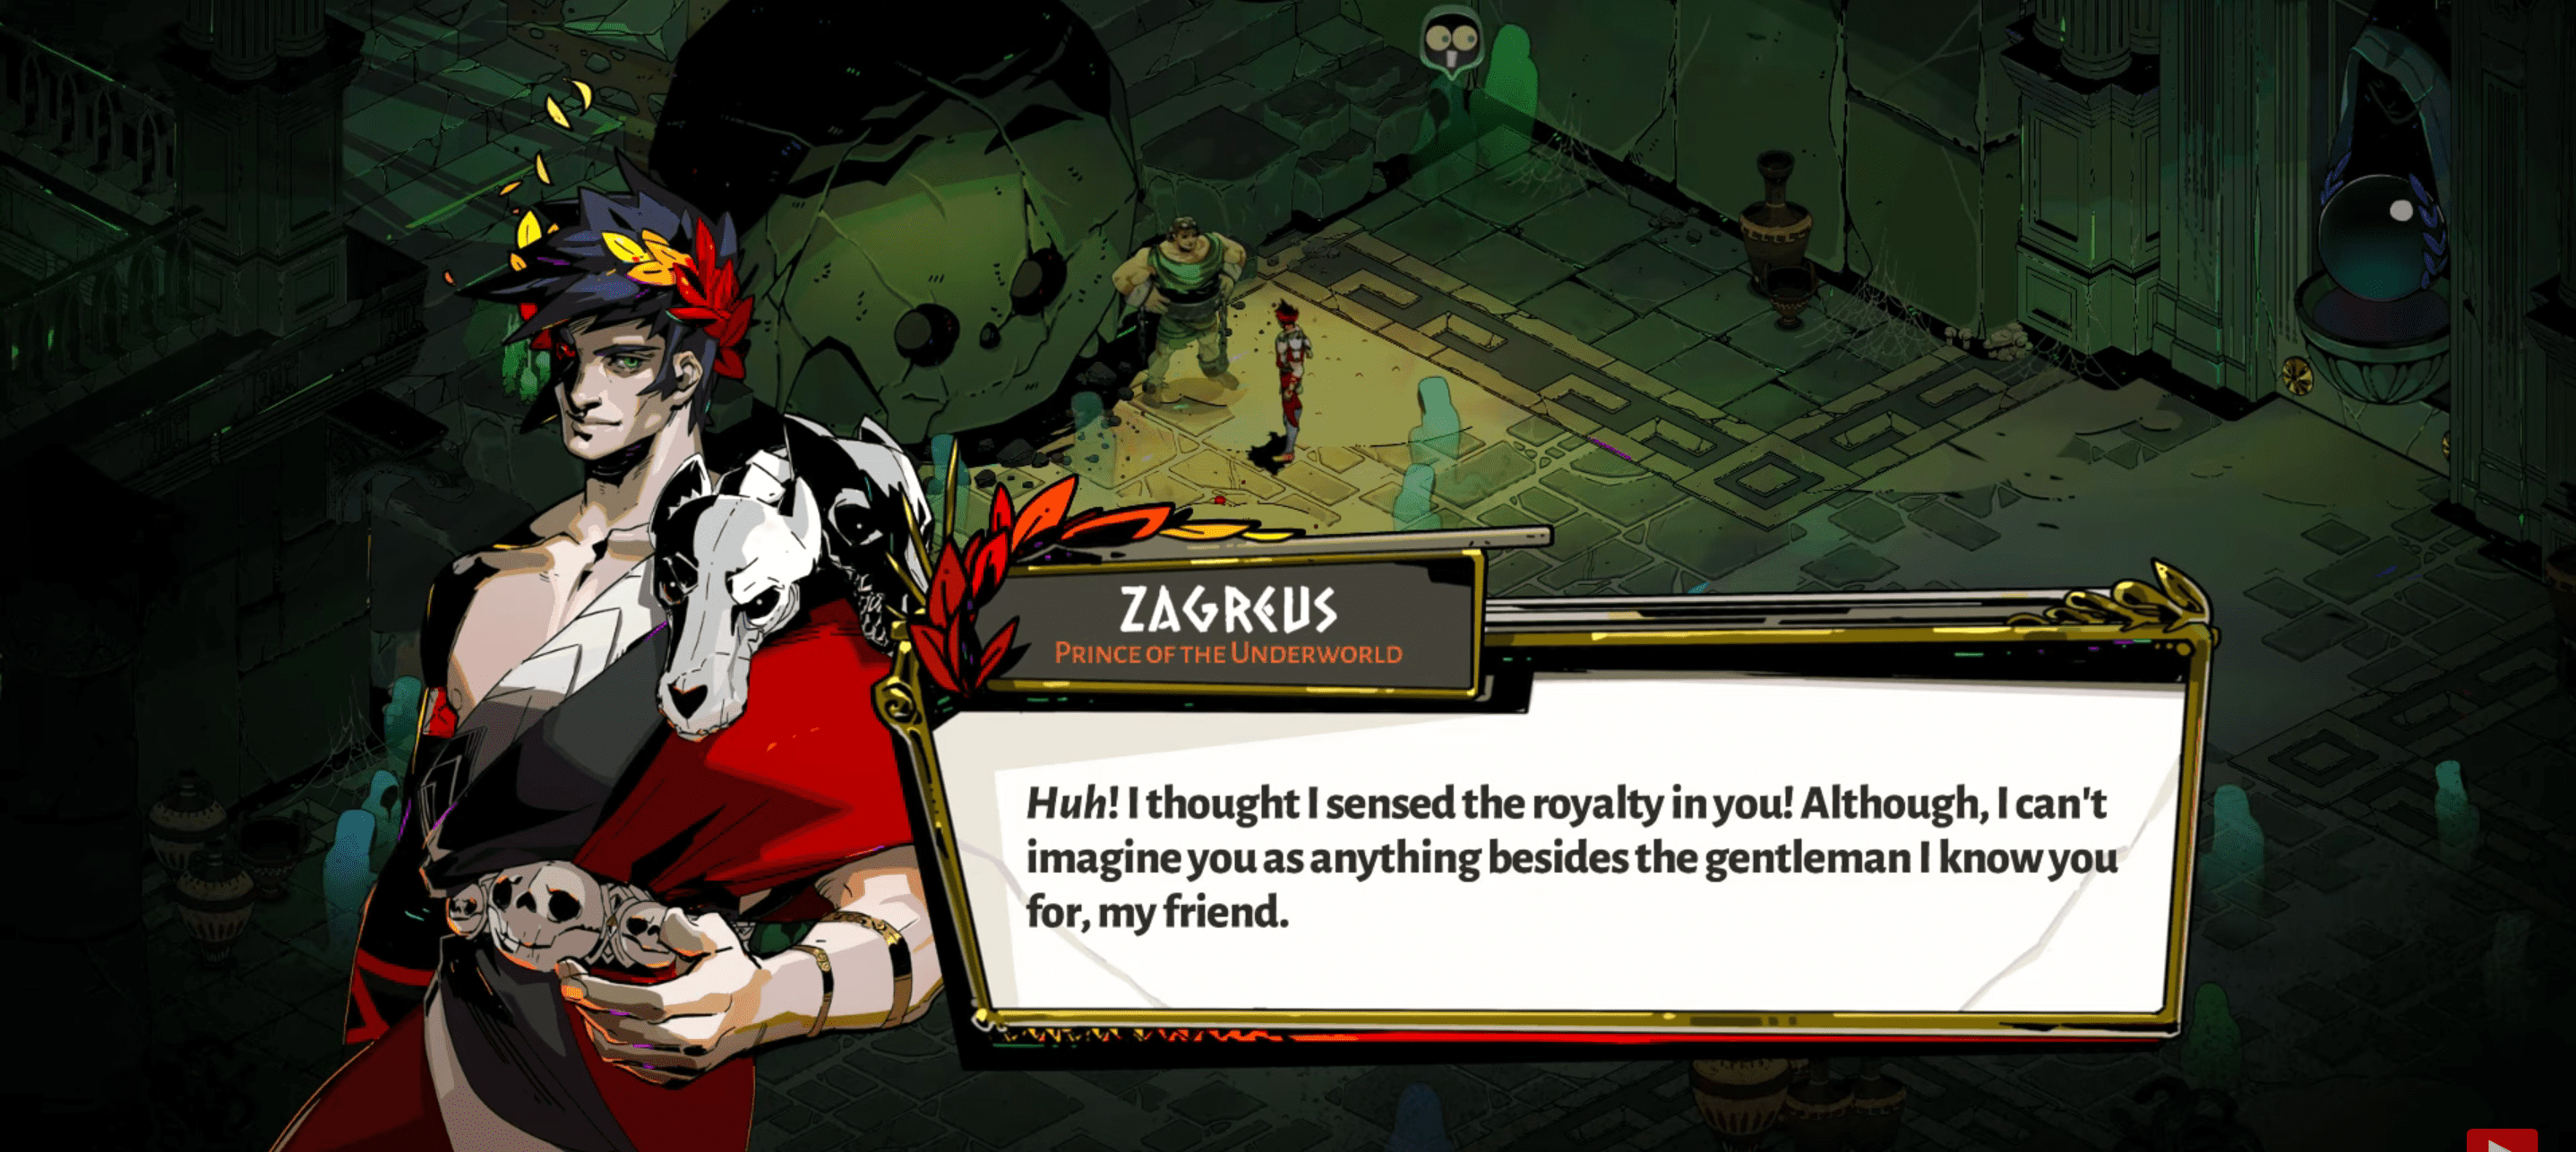 Zagreus learning of Sisyphus' dark past and saying he still sees him as a gentleman.